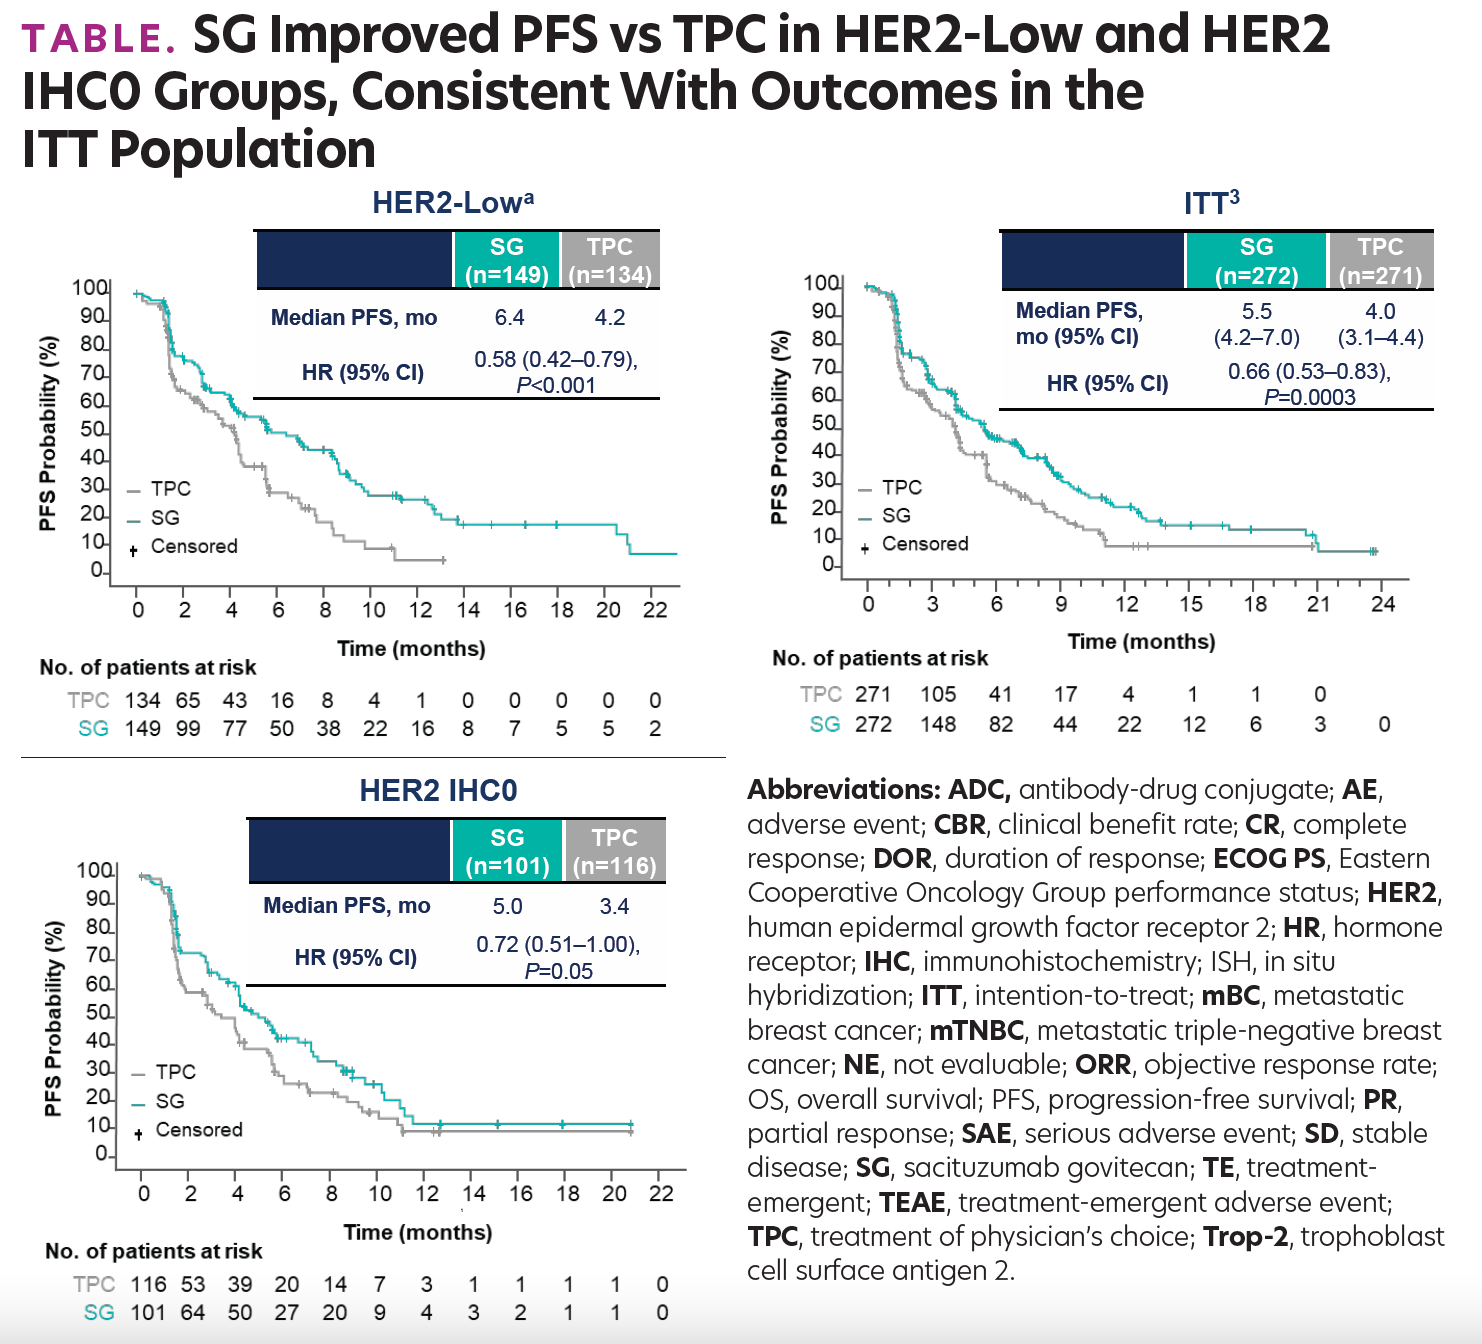 TABLE. SG Improved PFS vs TPC in HER2-Low and HER2 IHC0 Groups, Consistent With Outcomes in the ITT Population